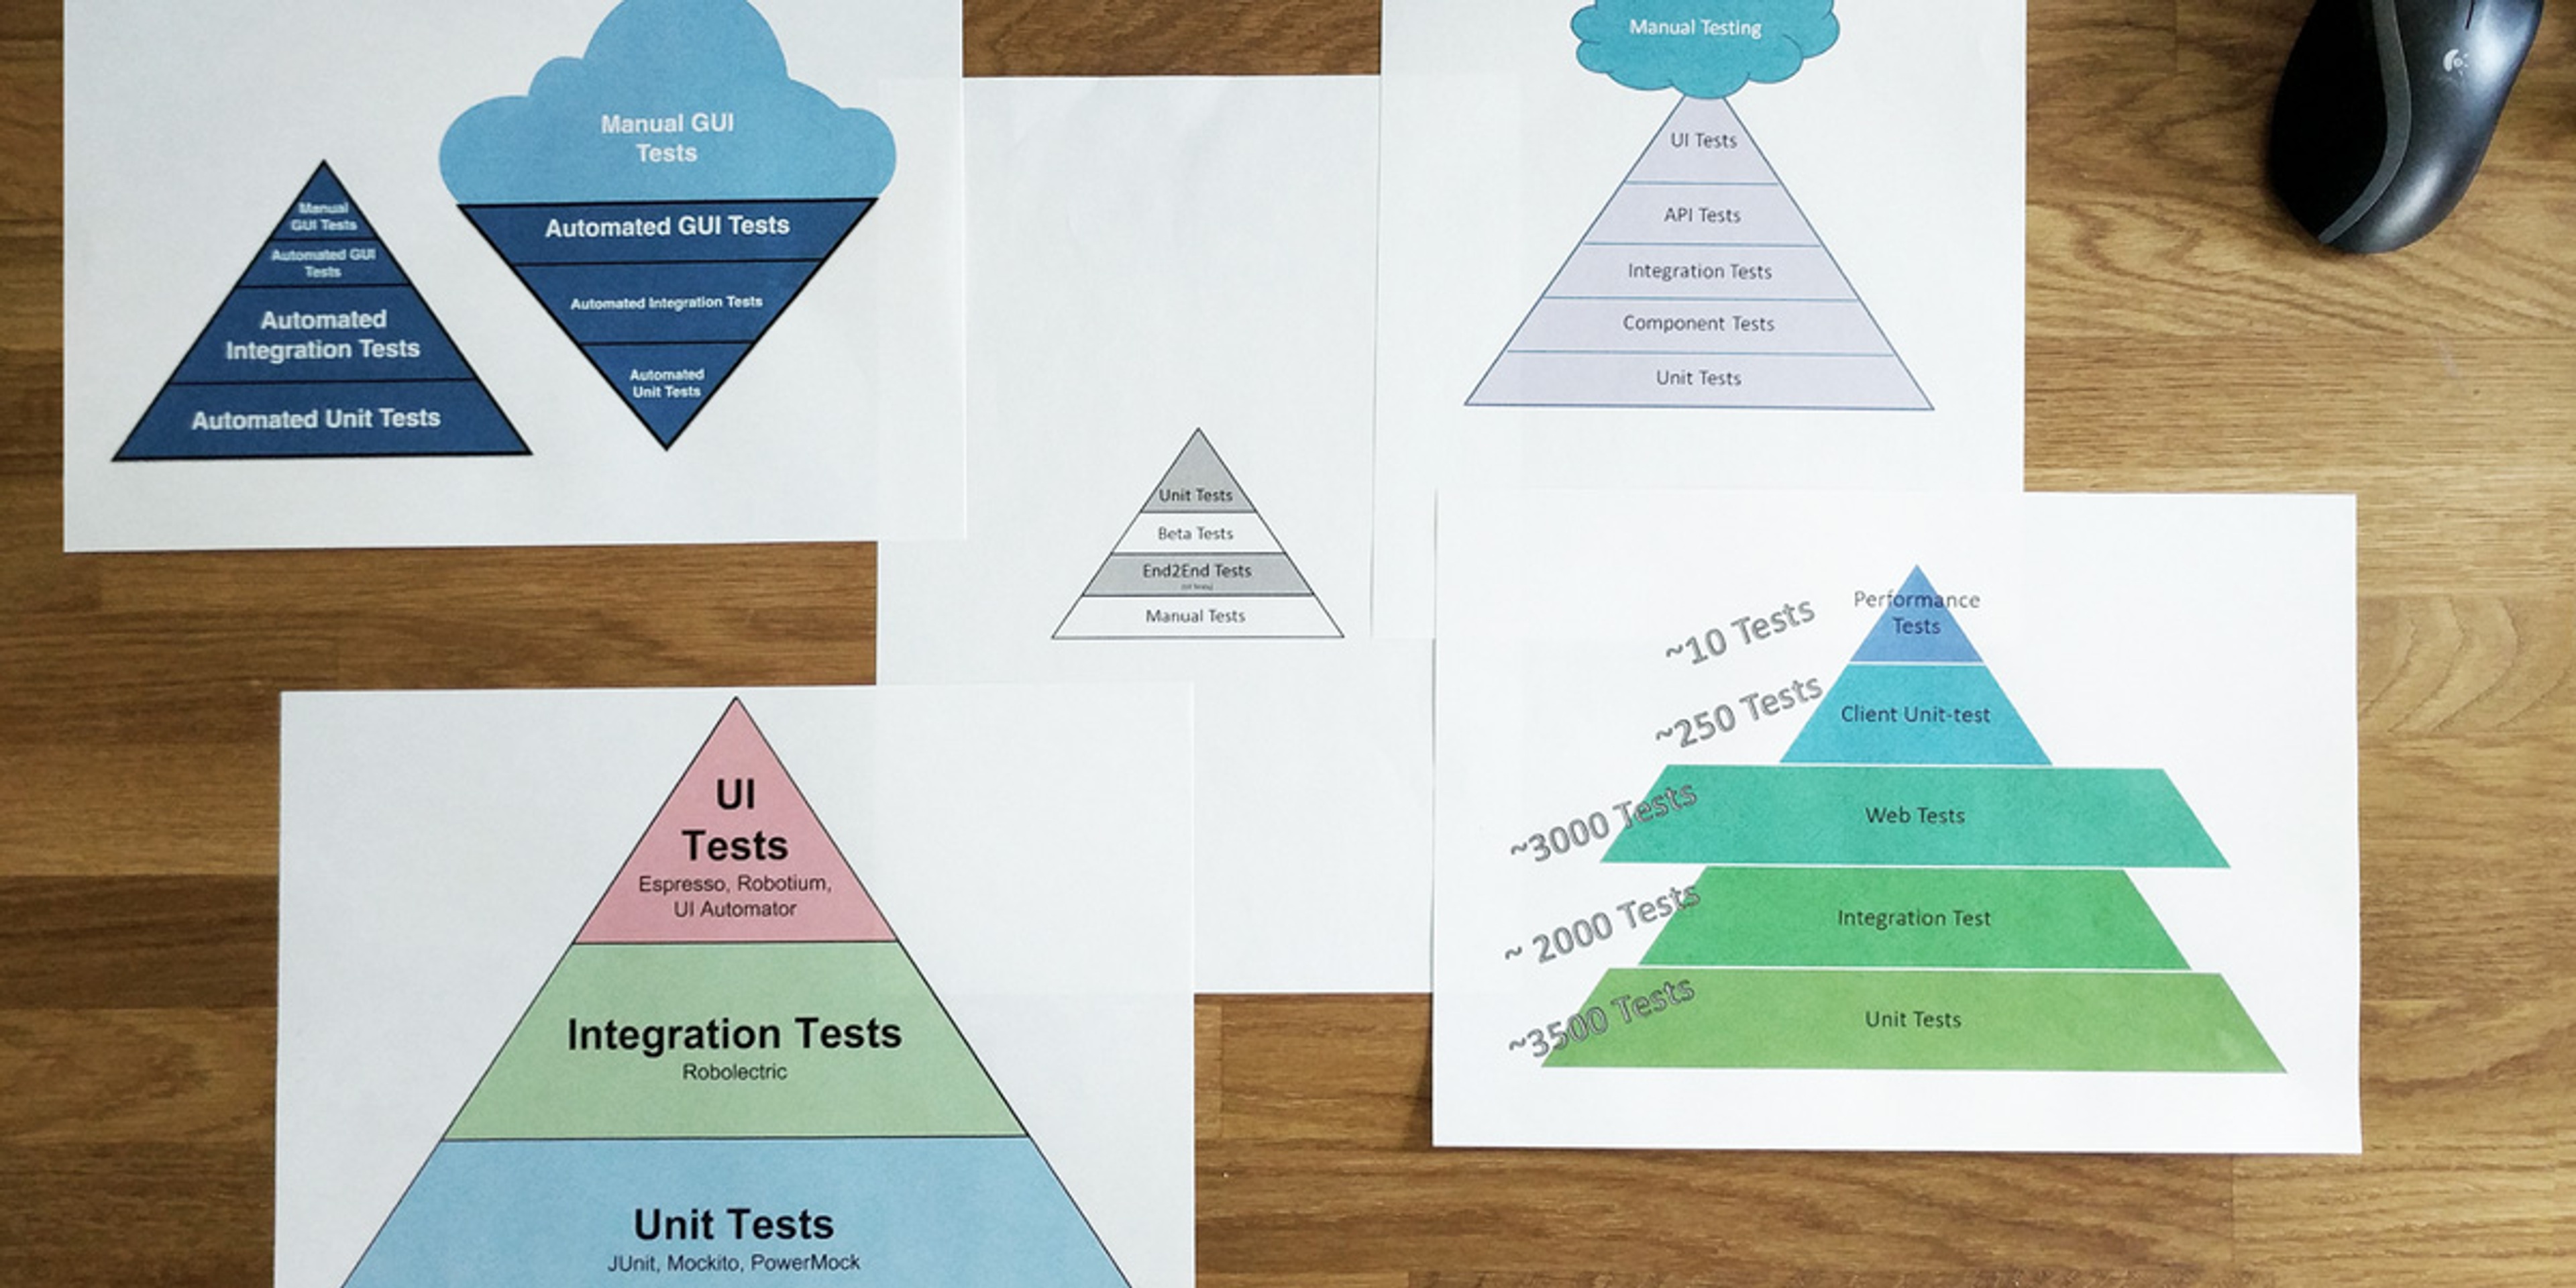 sheets of paper on a wooden surface showing images of unit tests and integration tests